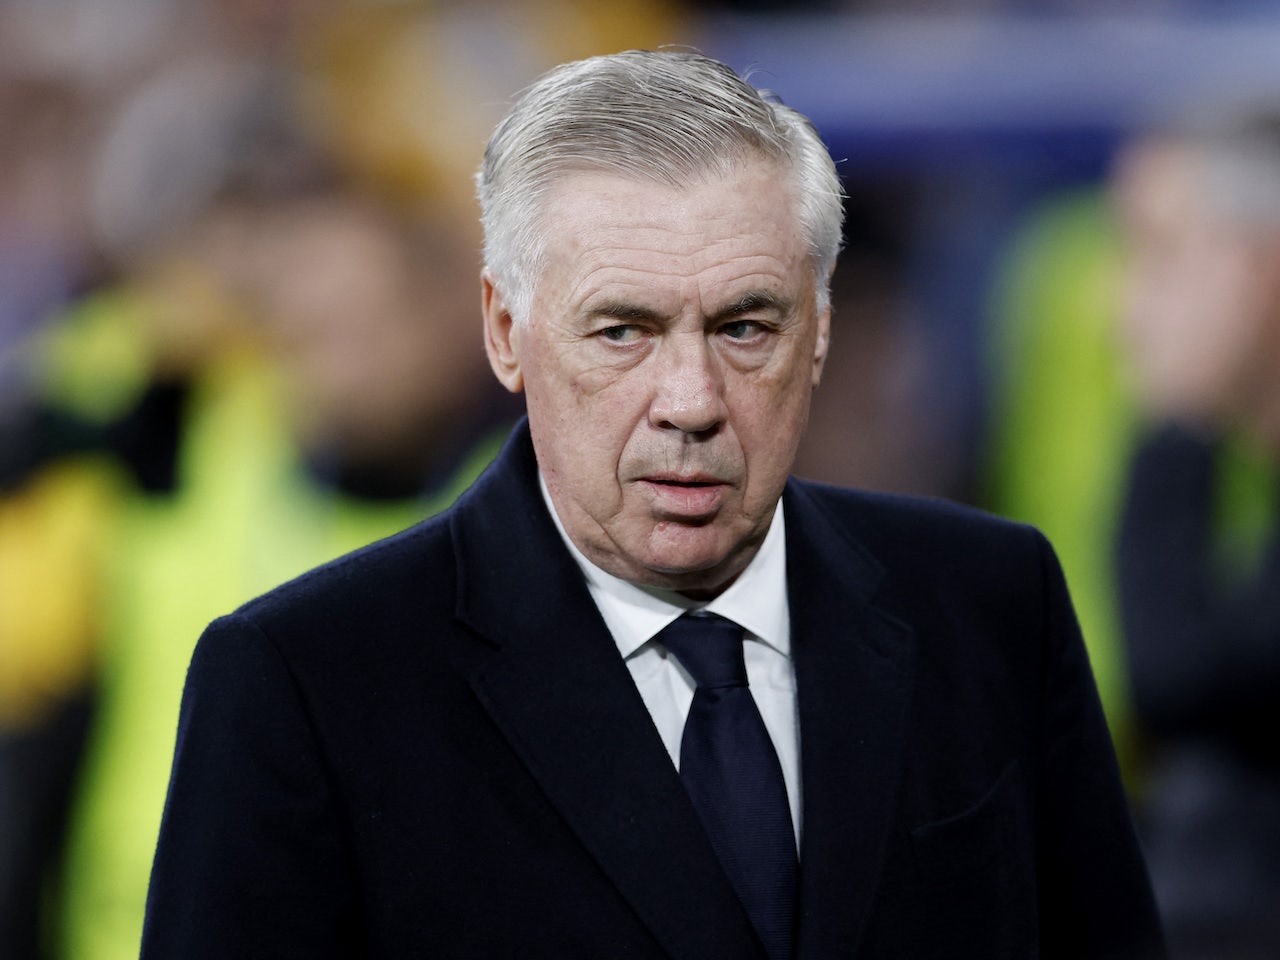 Real Madrid 'weighing up future move for Carlo Ancelotti replacement'